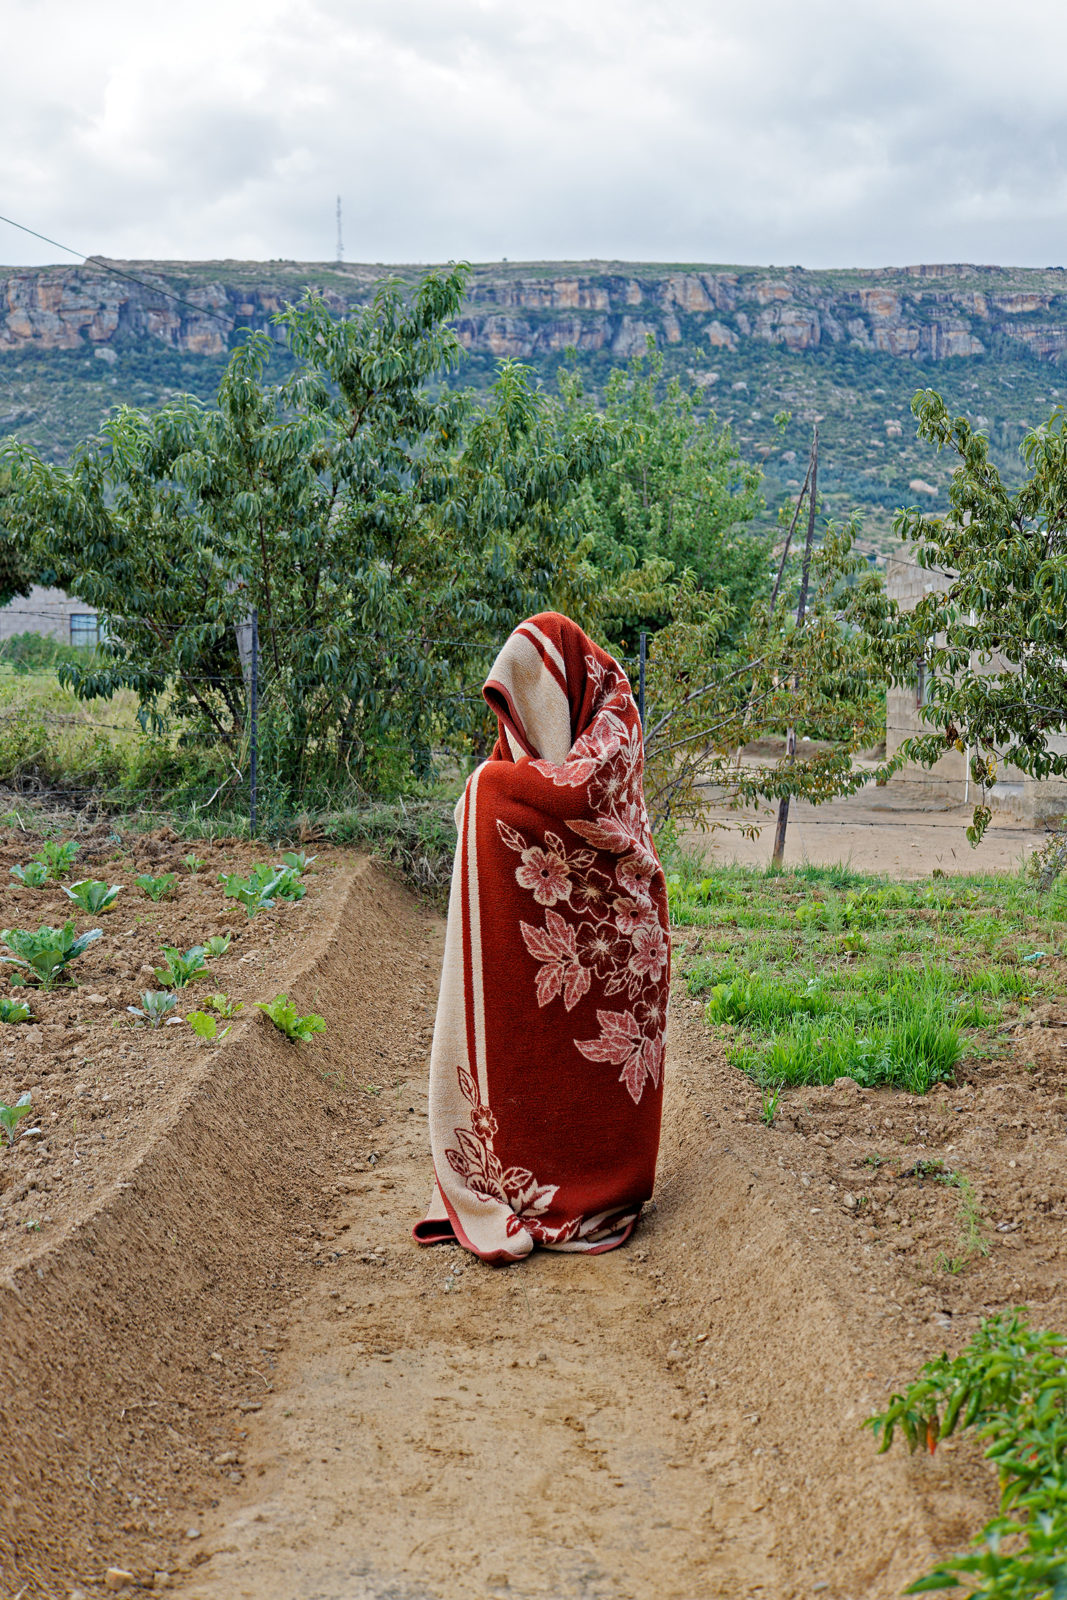 A photo of a cloaked person standing on a dirt road